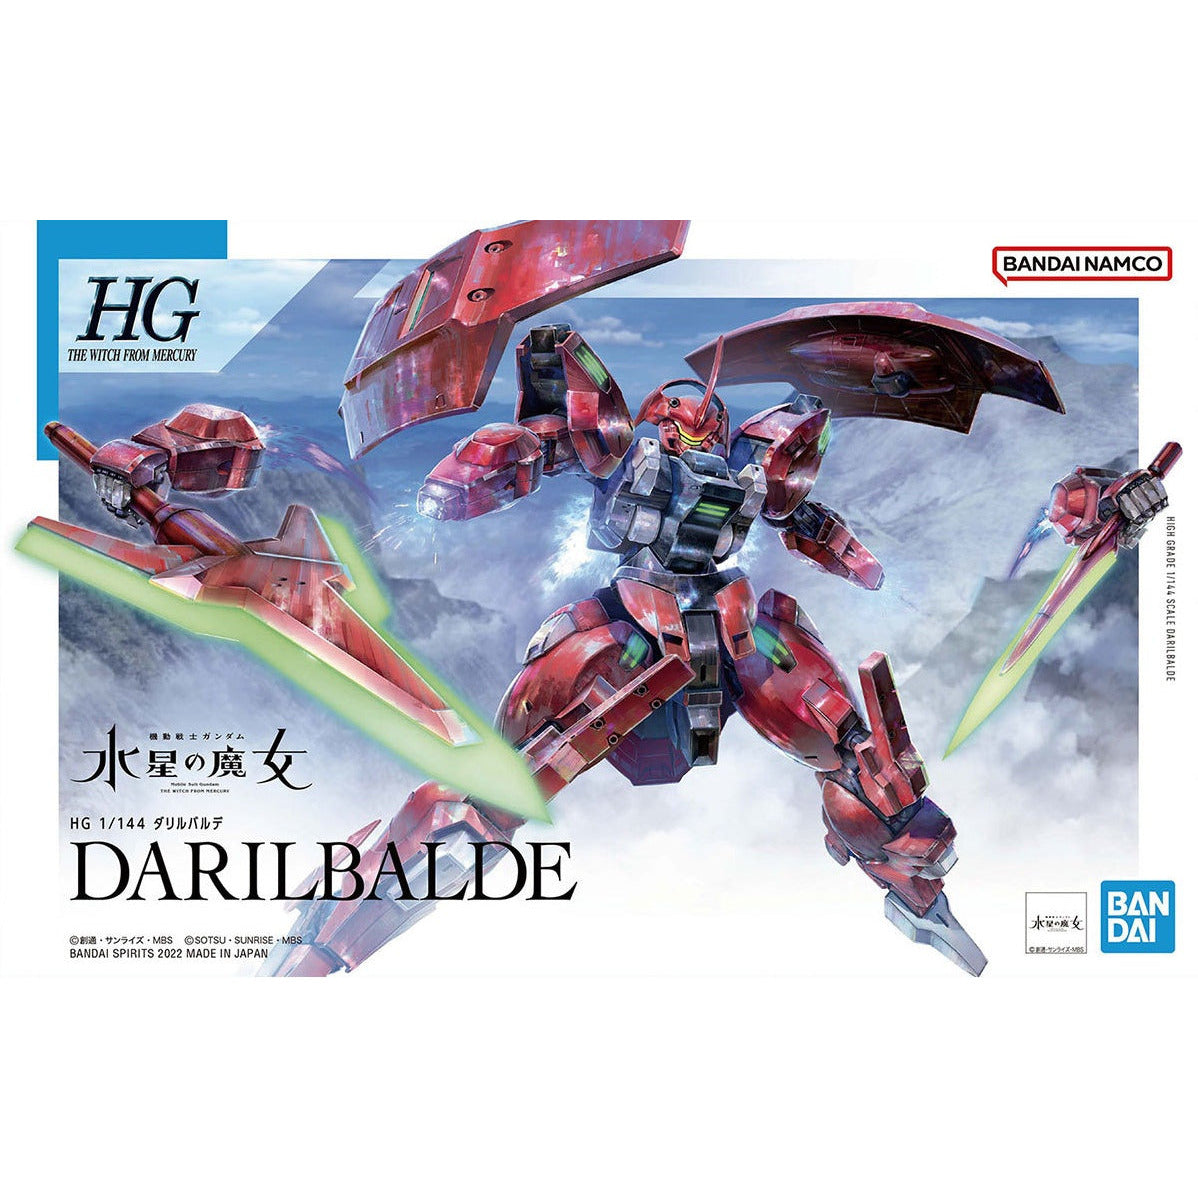 HG 1/144 The Witch from Mercury #08 MD-0064 Darilbalde #5063355 by Bandai